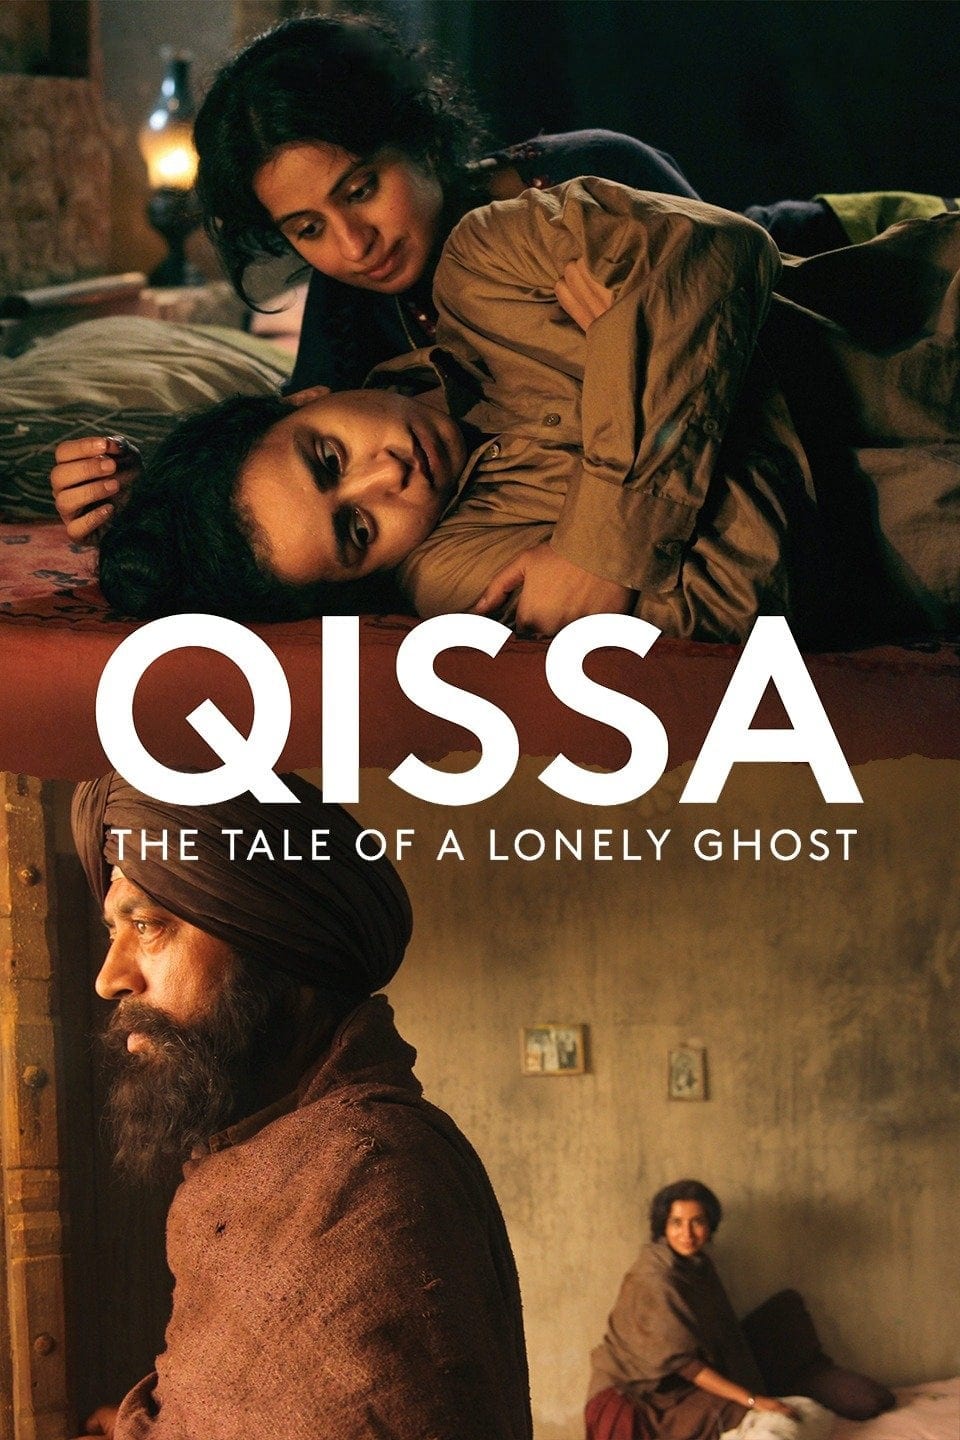 Poster for the movie "Qissa"